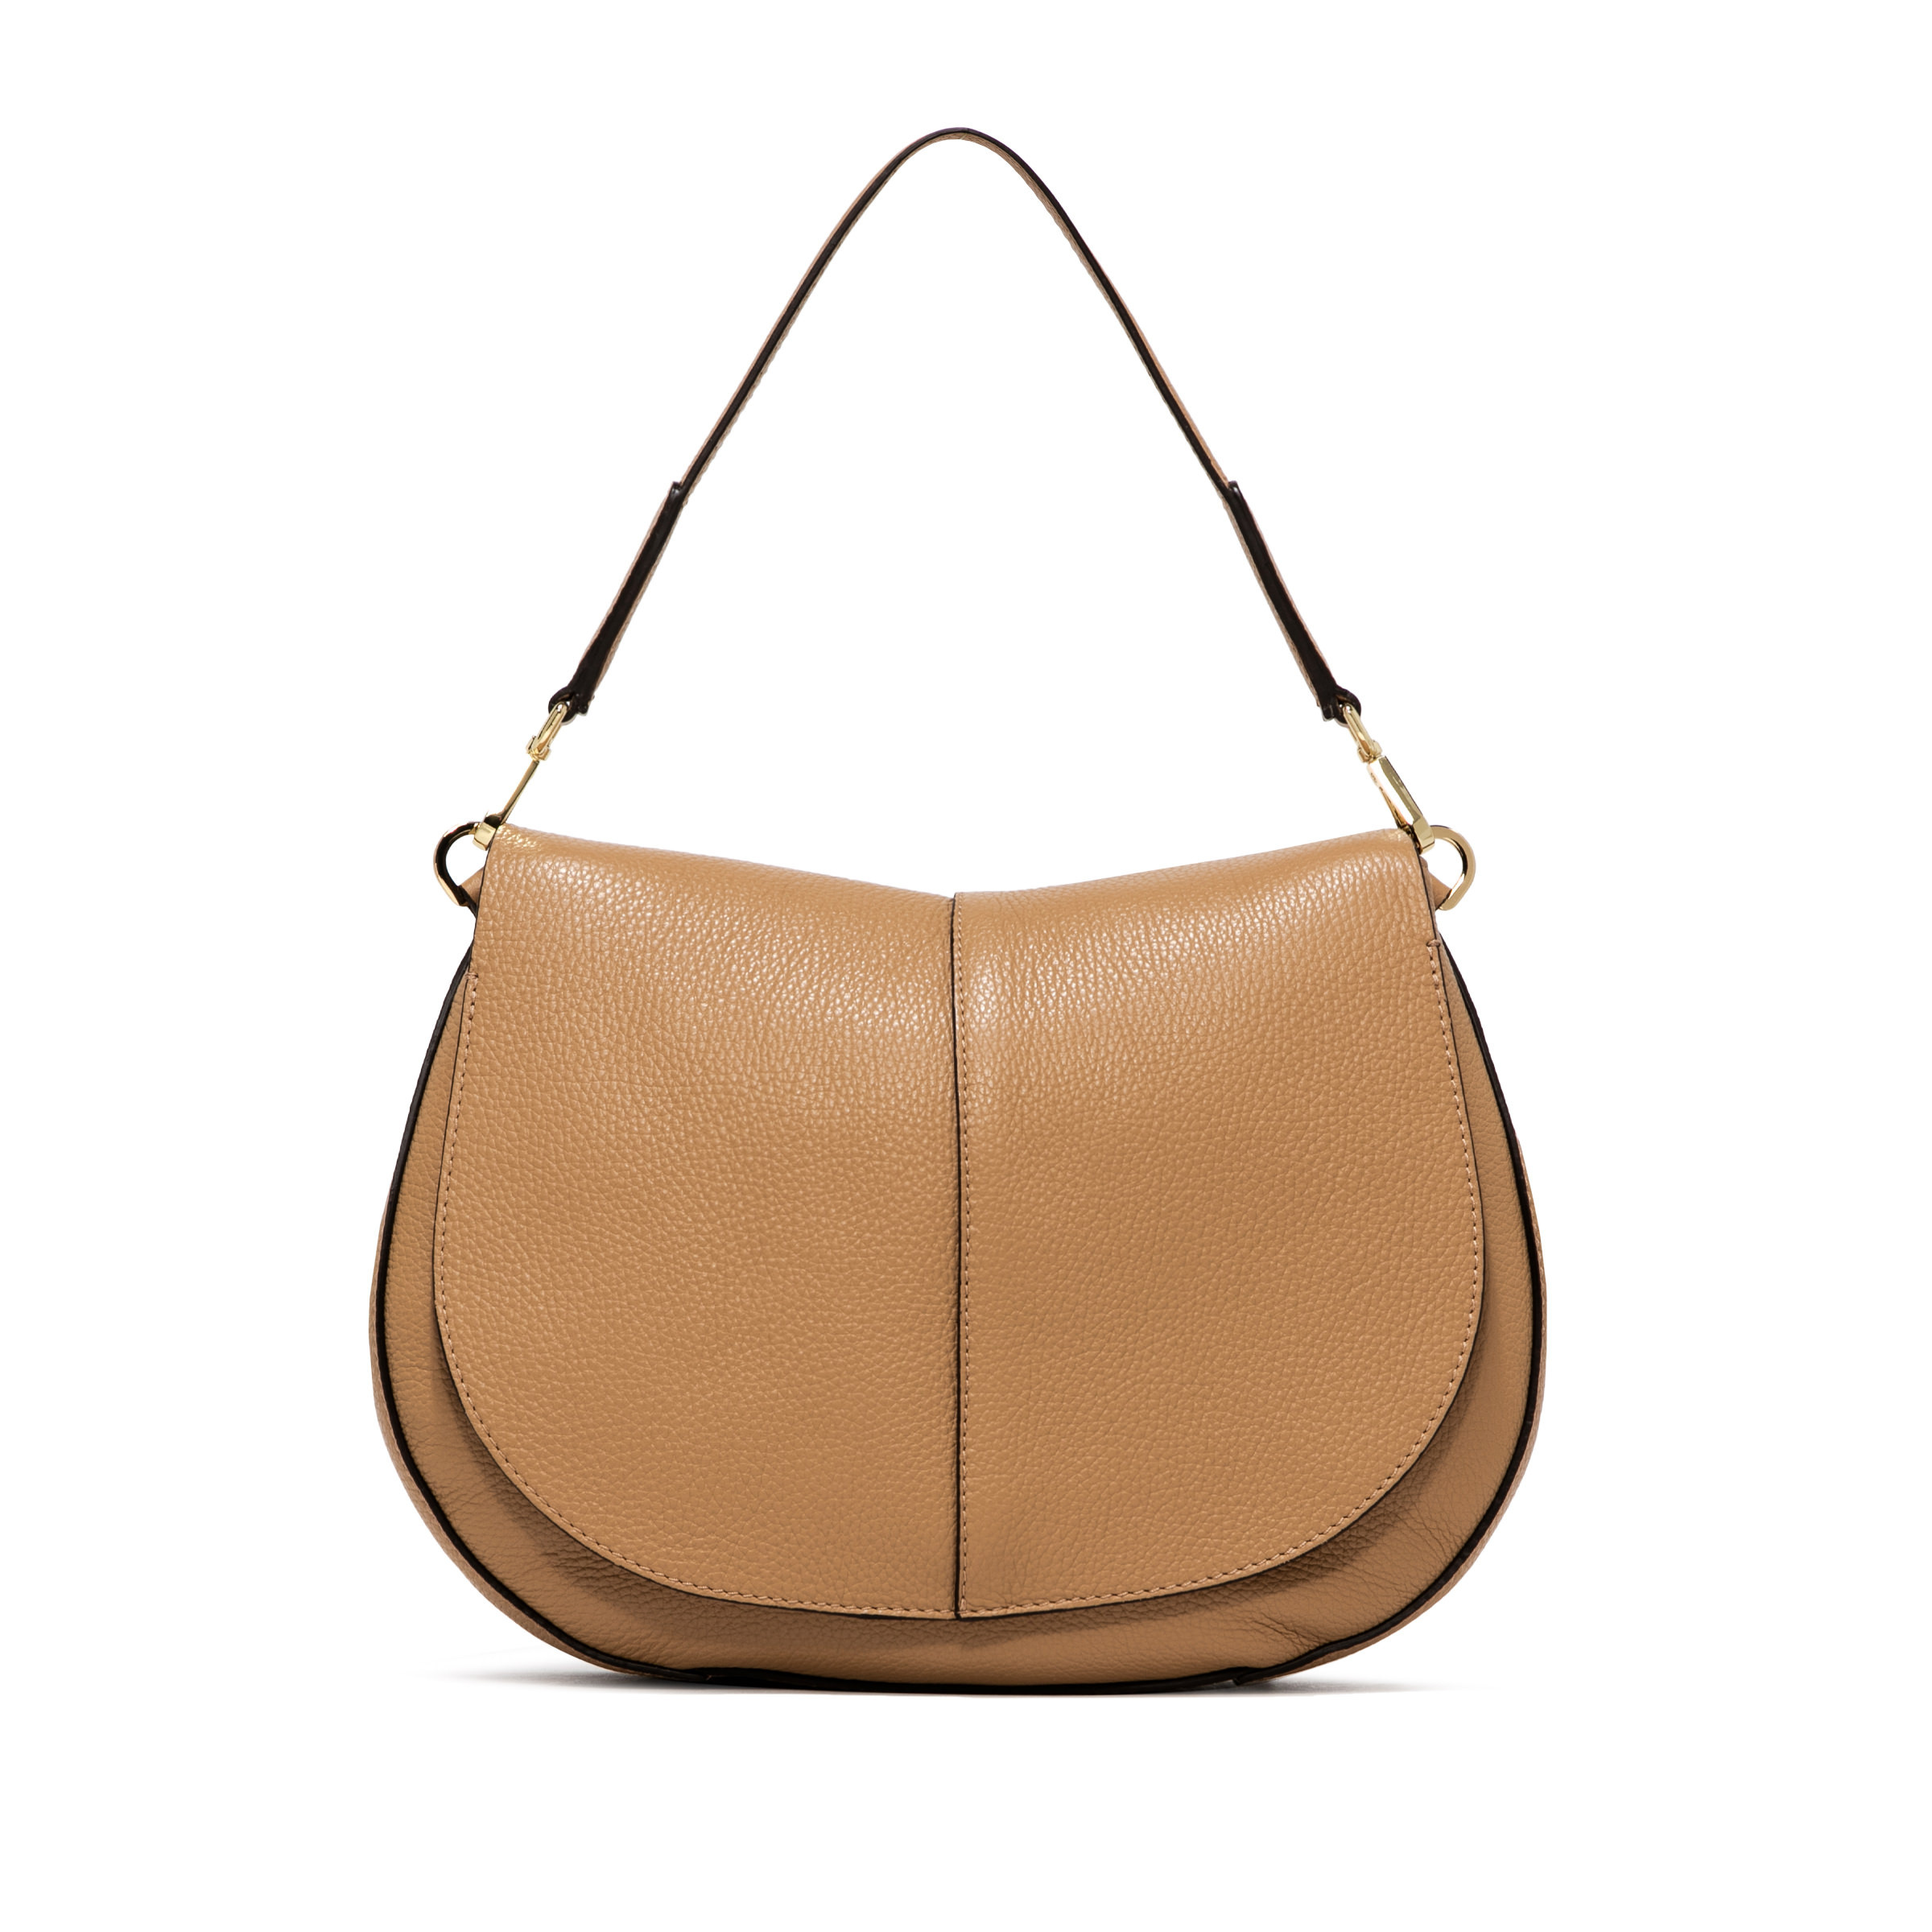 Gianni Chiarini - Helena Round bag in leather, Natural, large image number 0